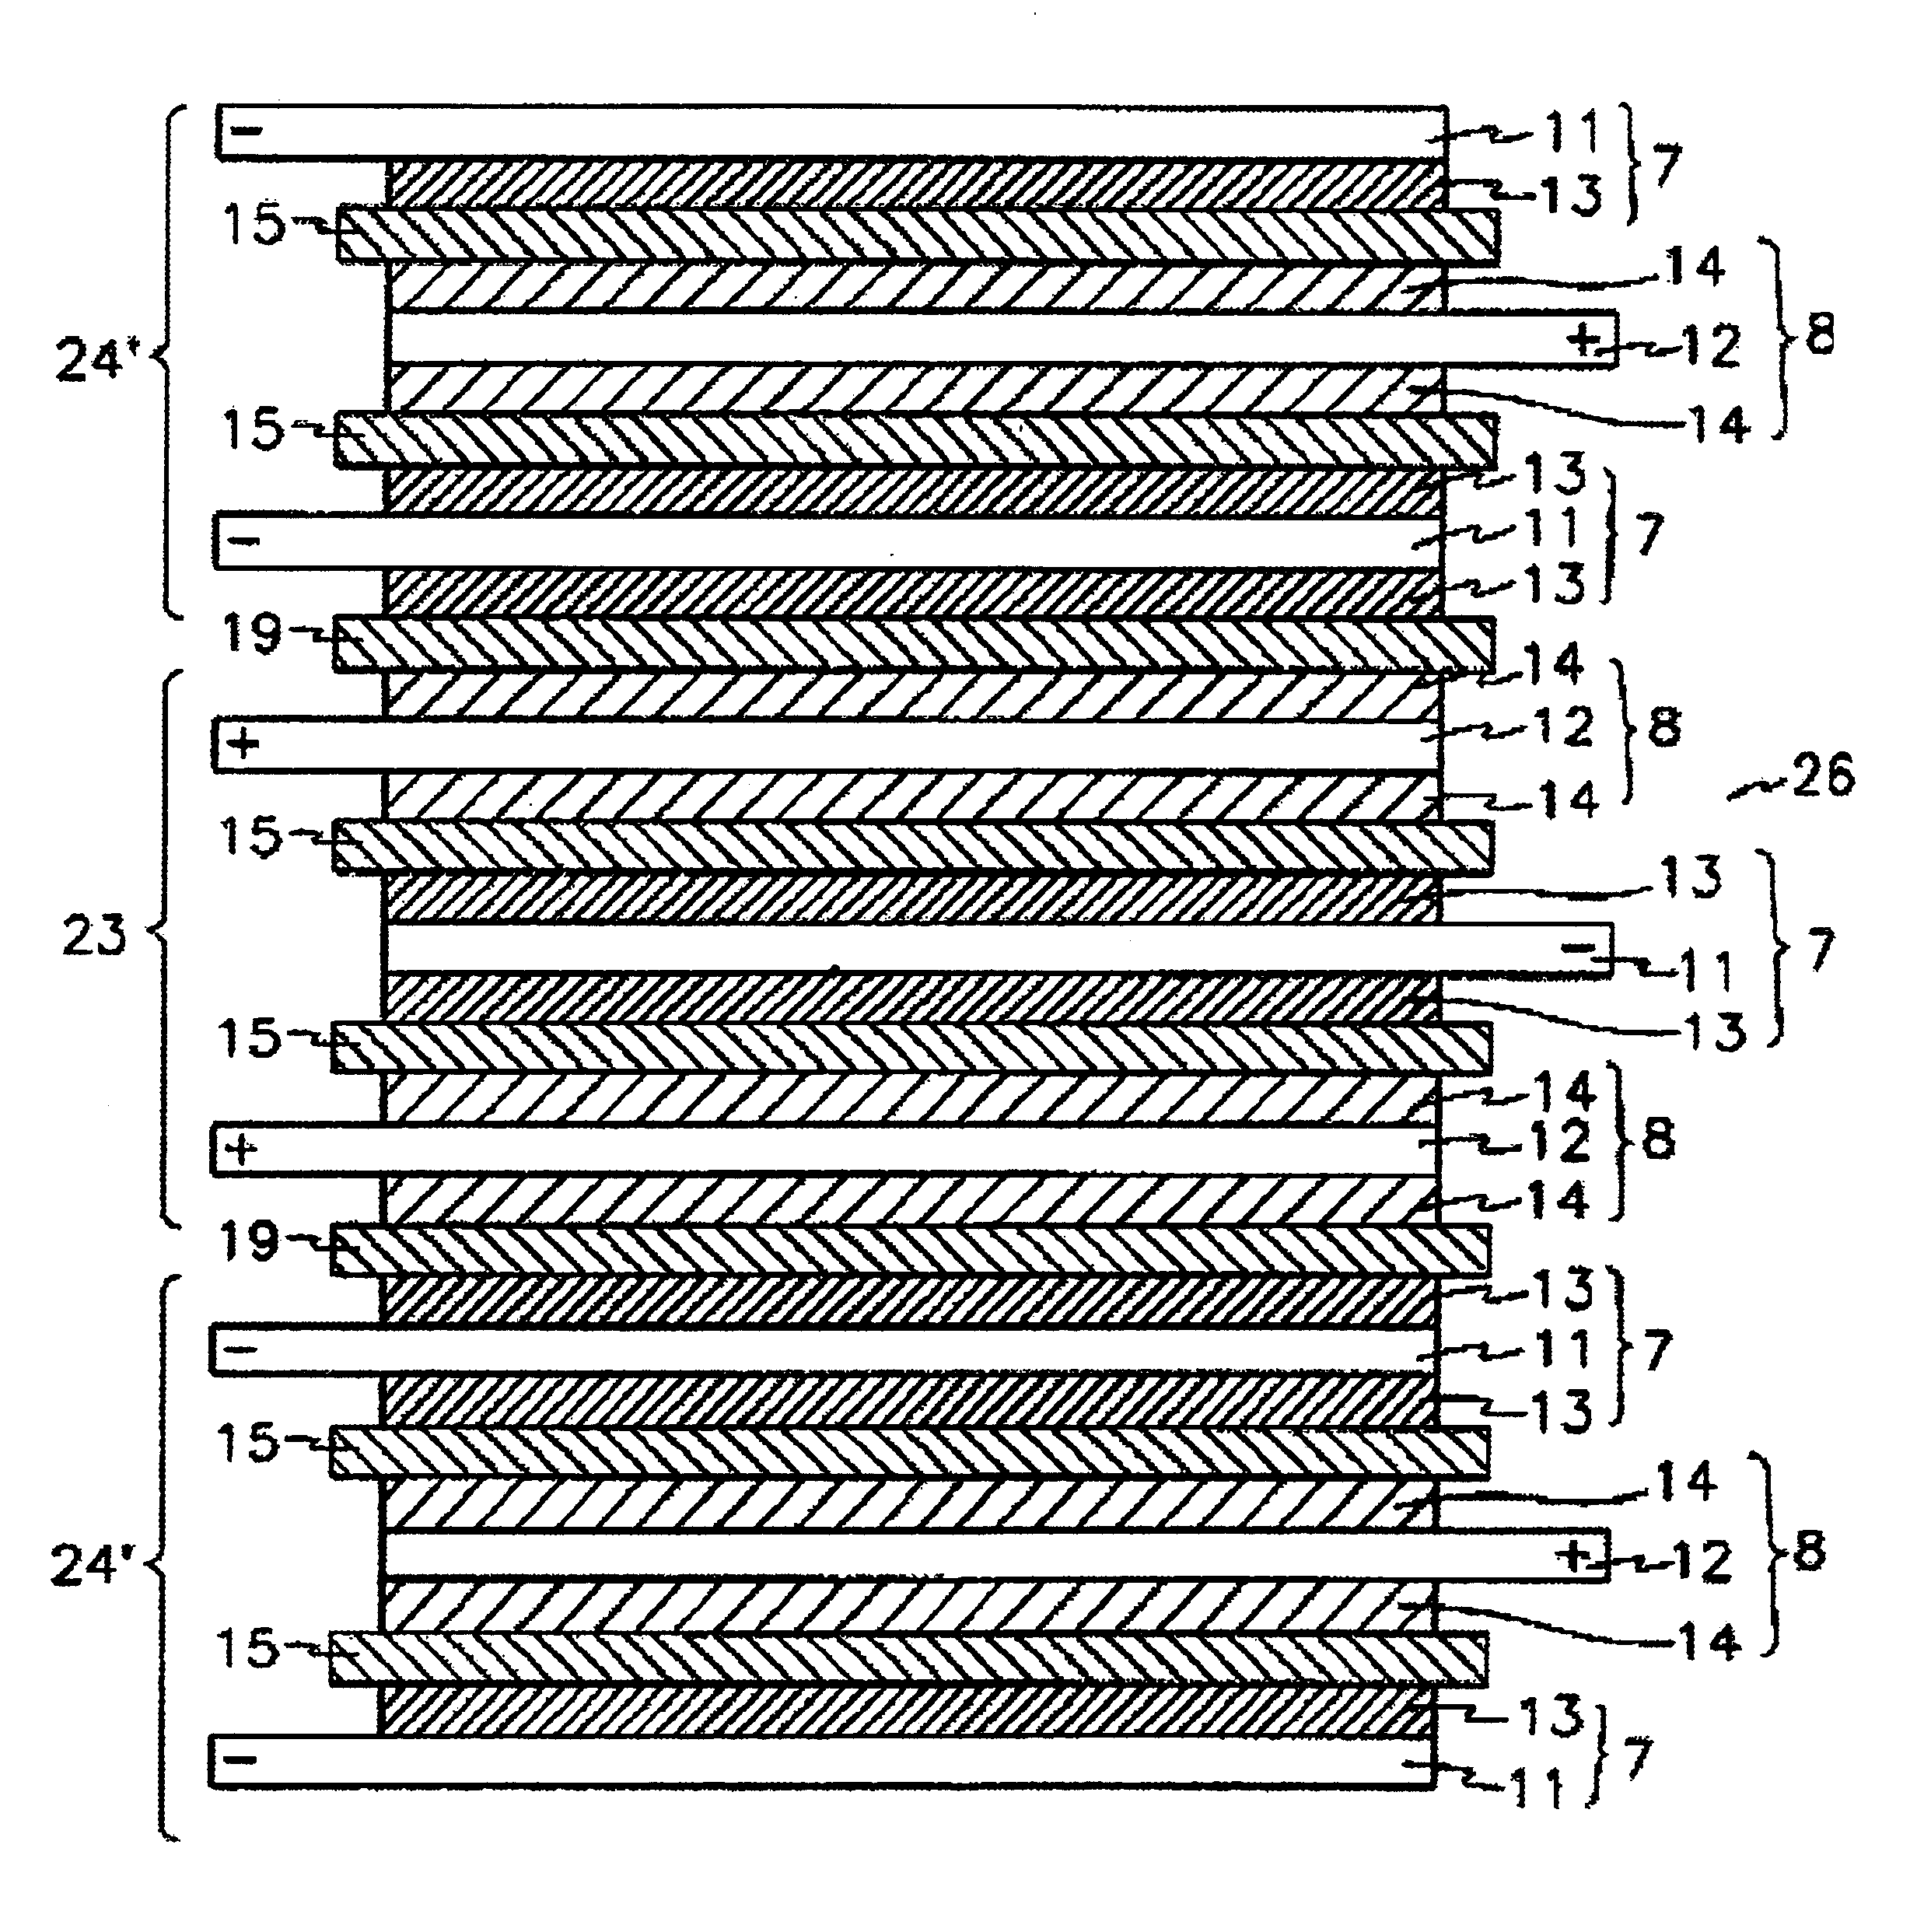 Stacked electrochemical cell